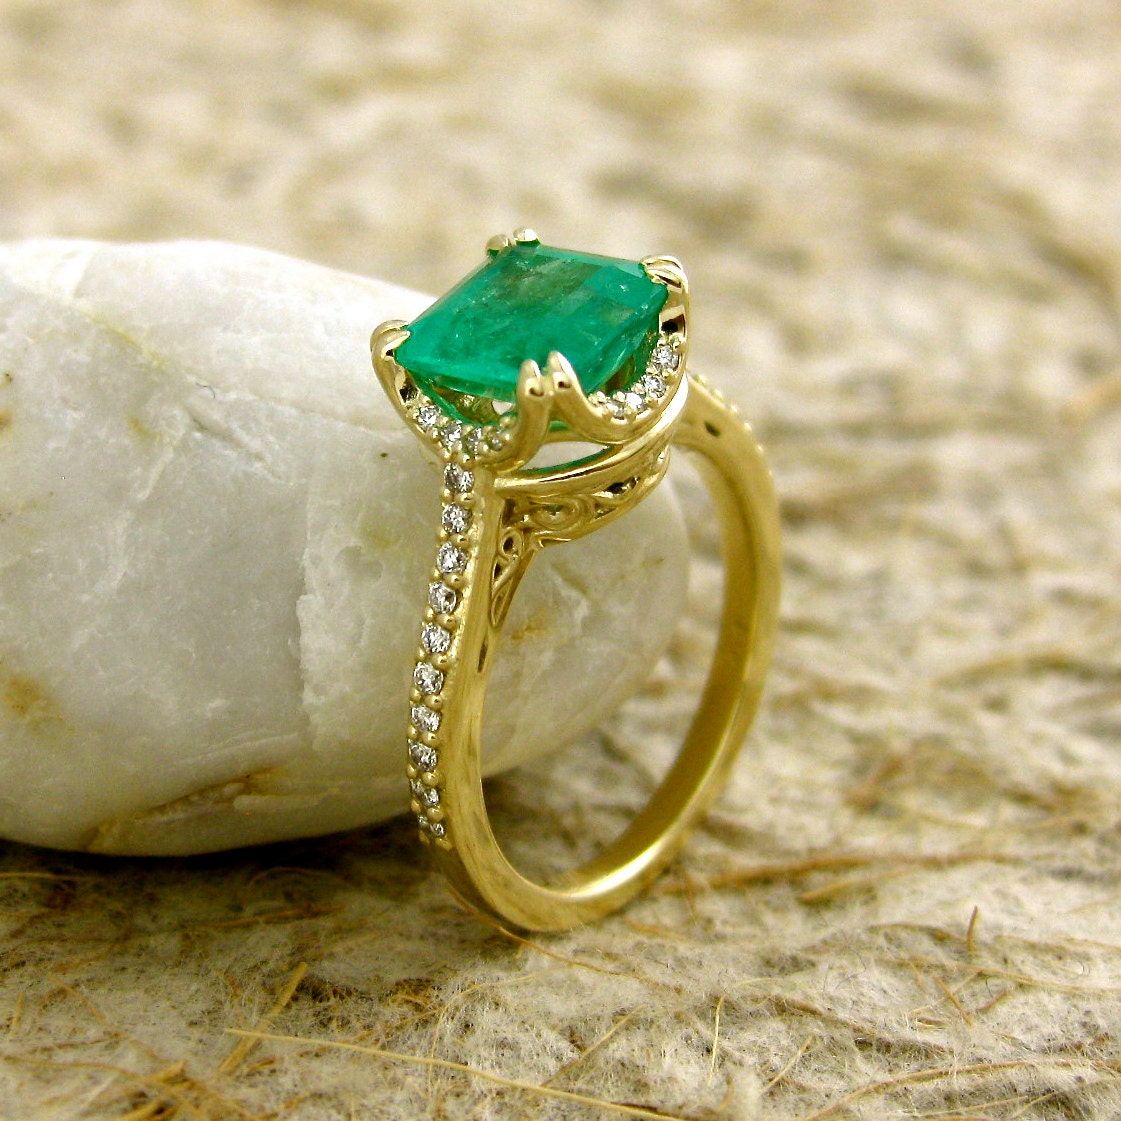 Cushion Cut Emerald Engagement Ring in 14K Yellow Gold with